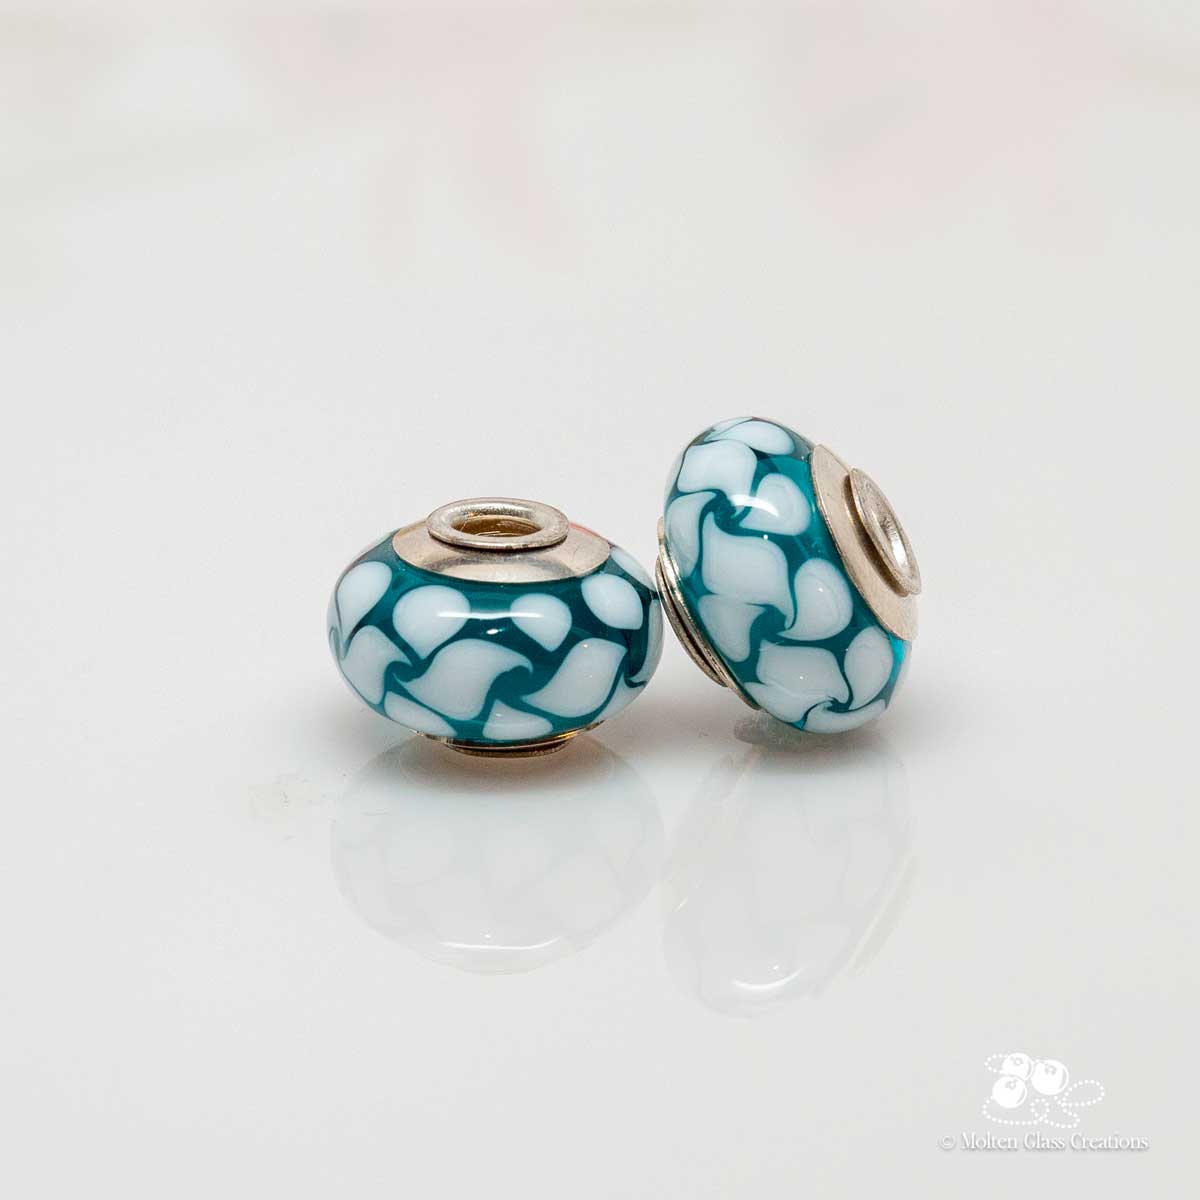 Big Hole Bead - Teal with Swirl Pattern - Molten Glass Creations